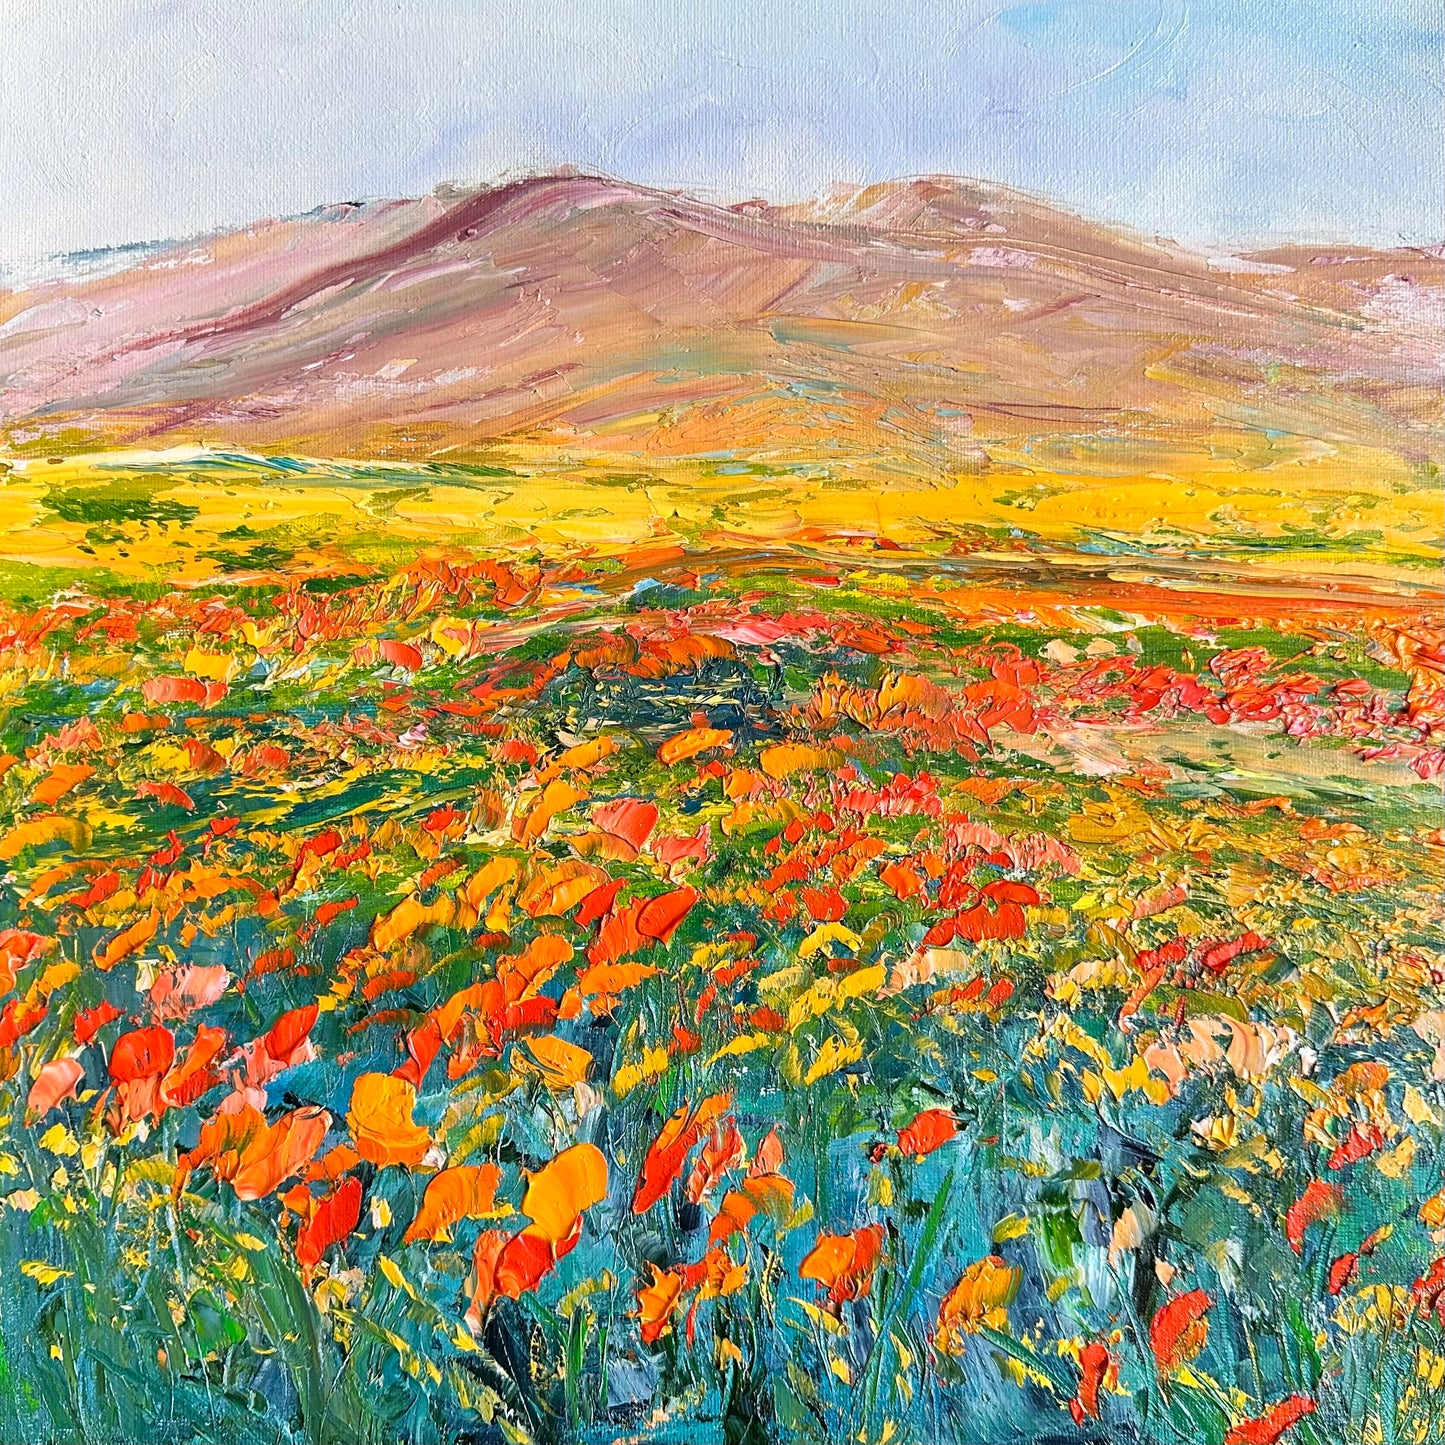 abstract impressionist painting of a california flower field in tones of yellows and oranges at the foot of a mountain.